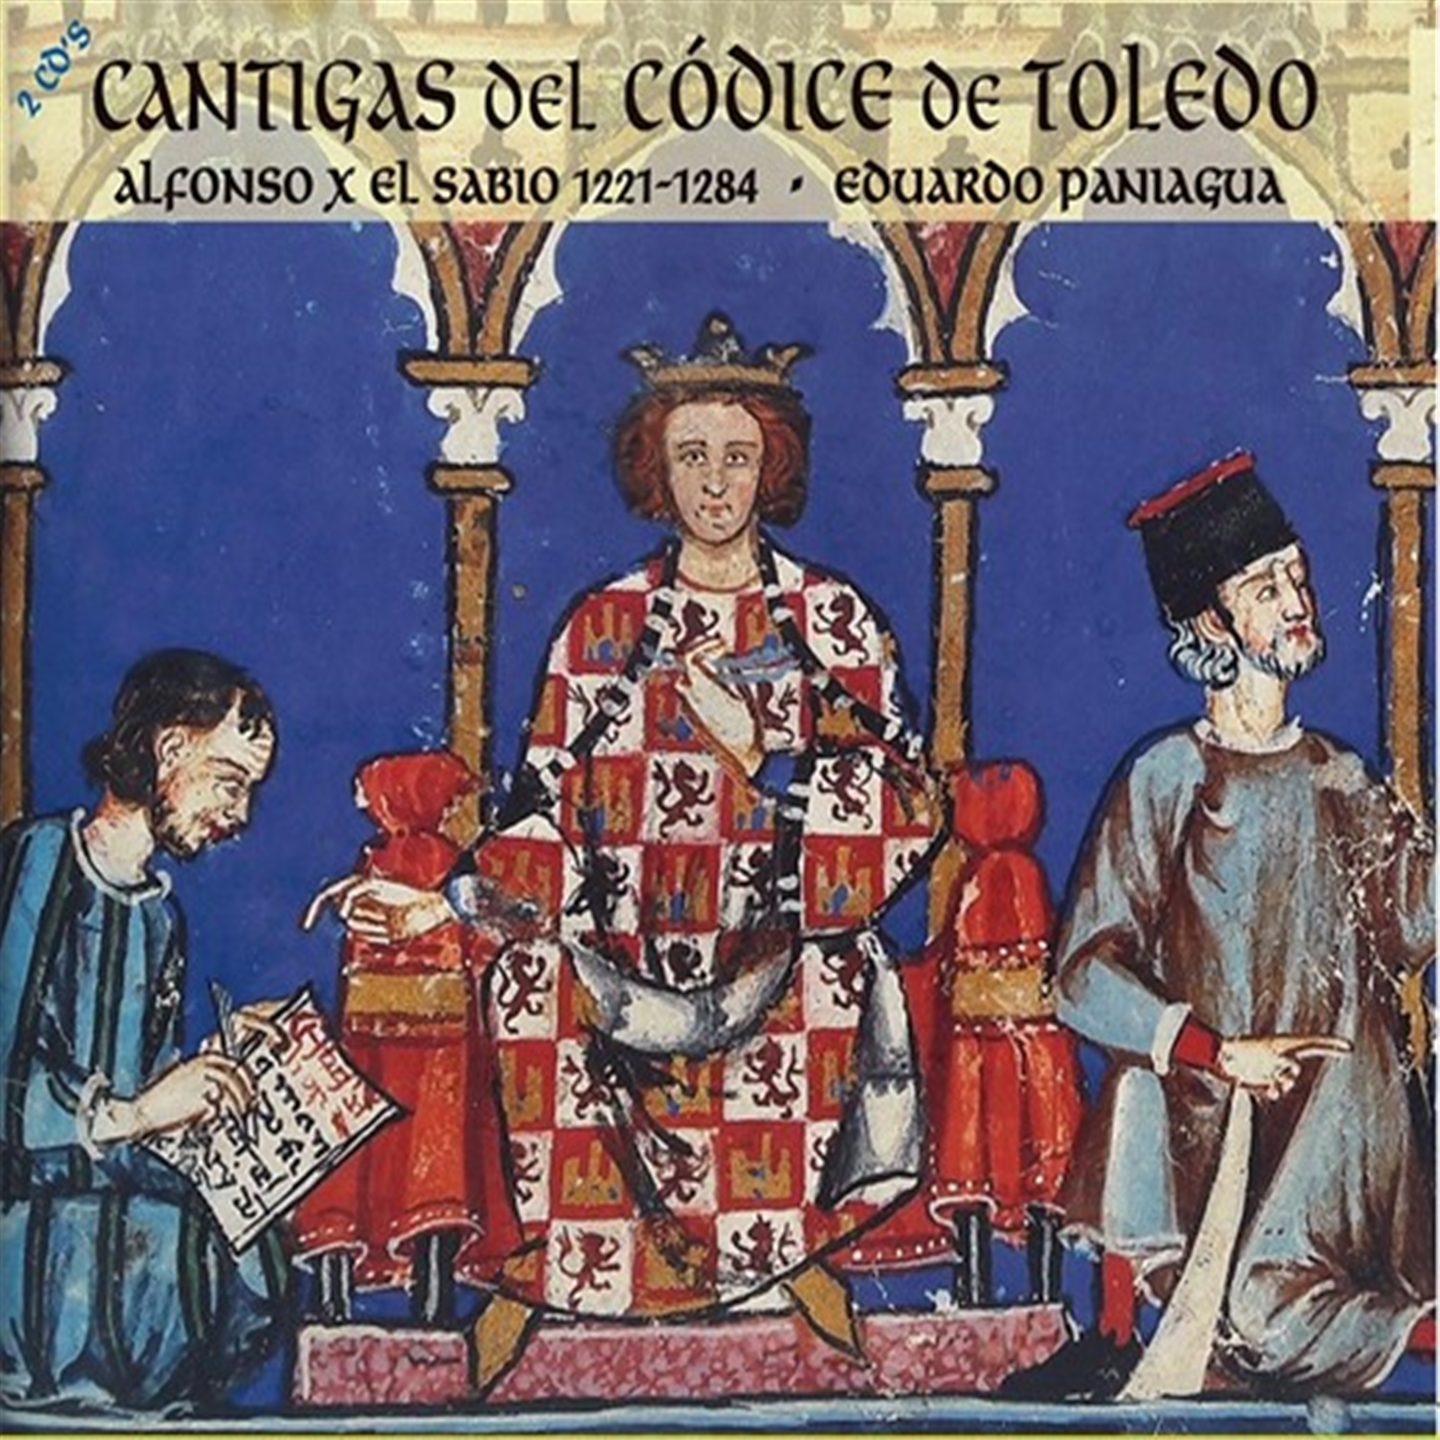 CANTIGAS FROM THE TOLEDO CODEX